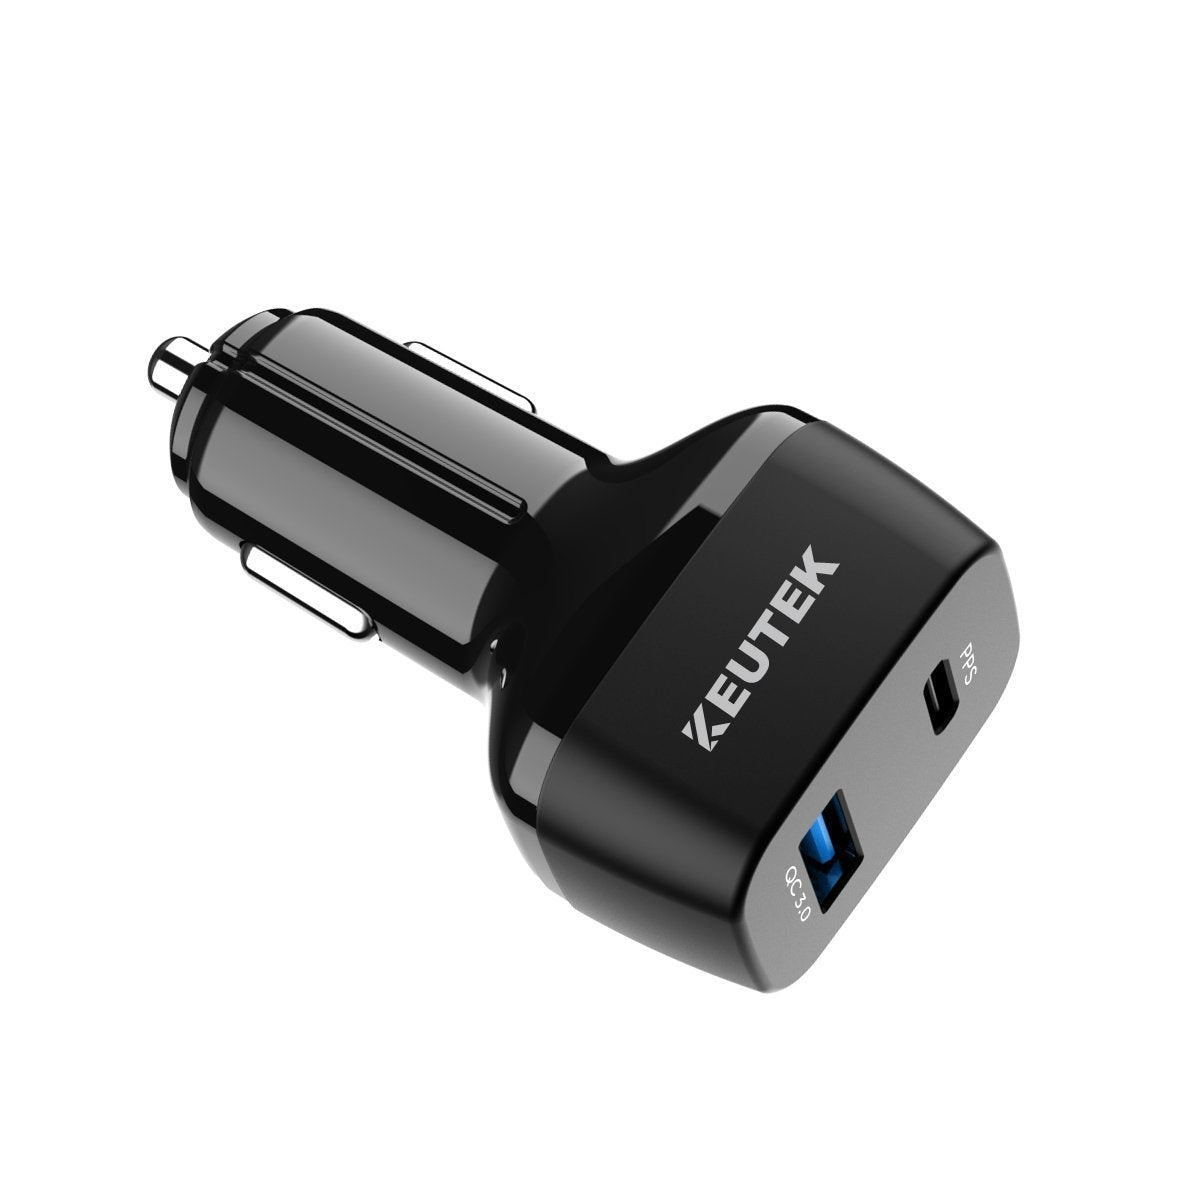 48W Fast Car Charger with 30W PD + 18W QC 3.0 - KEUTEK